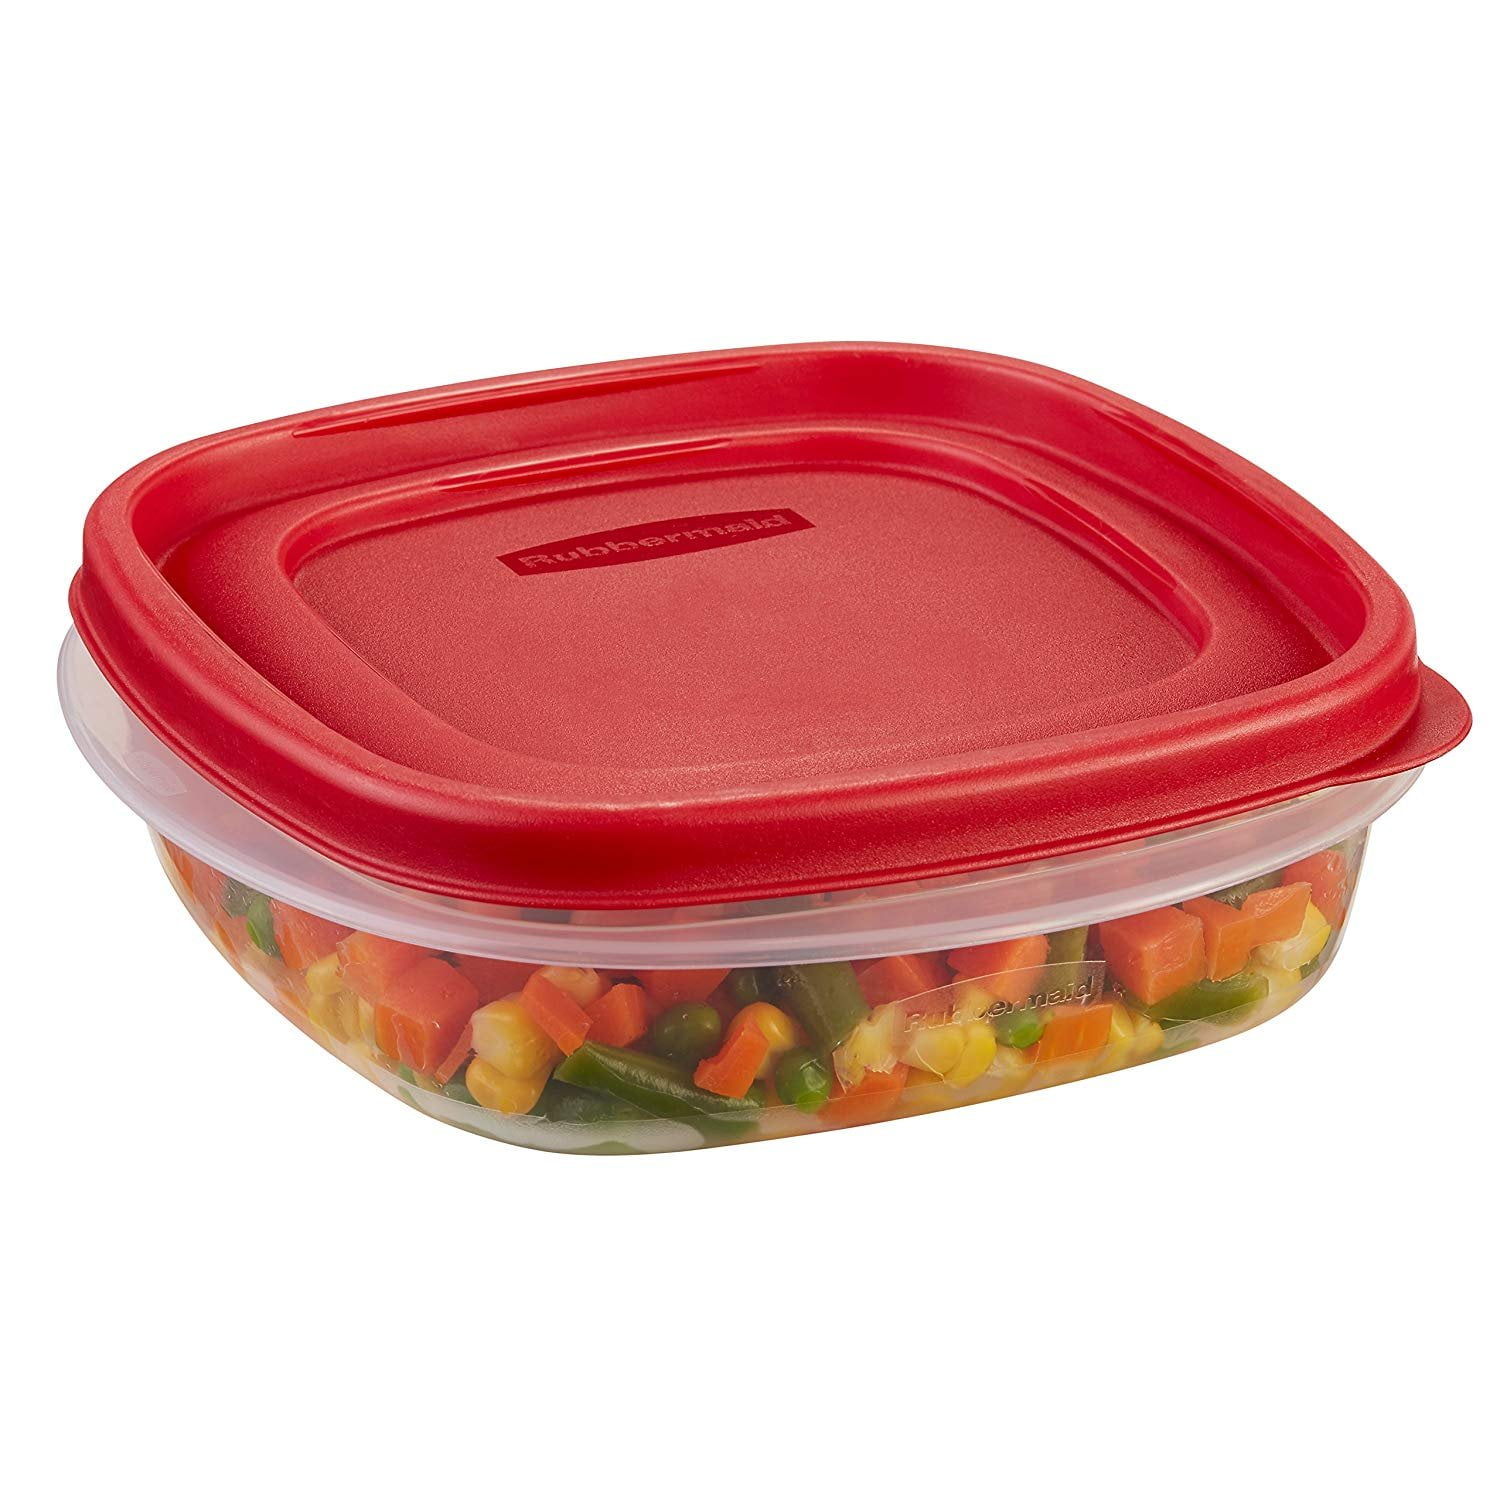 Rubbermaid® Easy Find Lids Food Storage Containers, 6 pc - Kroger